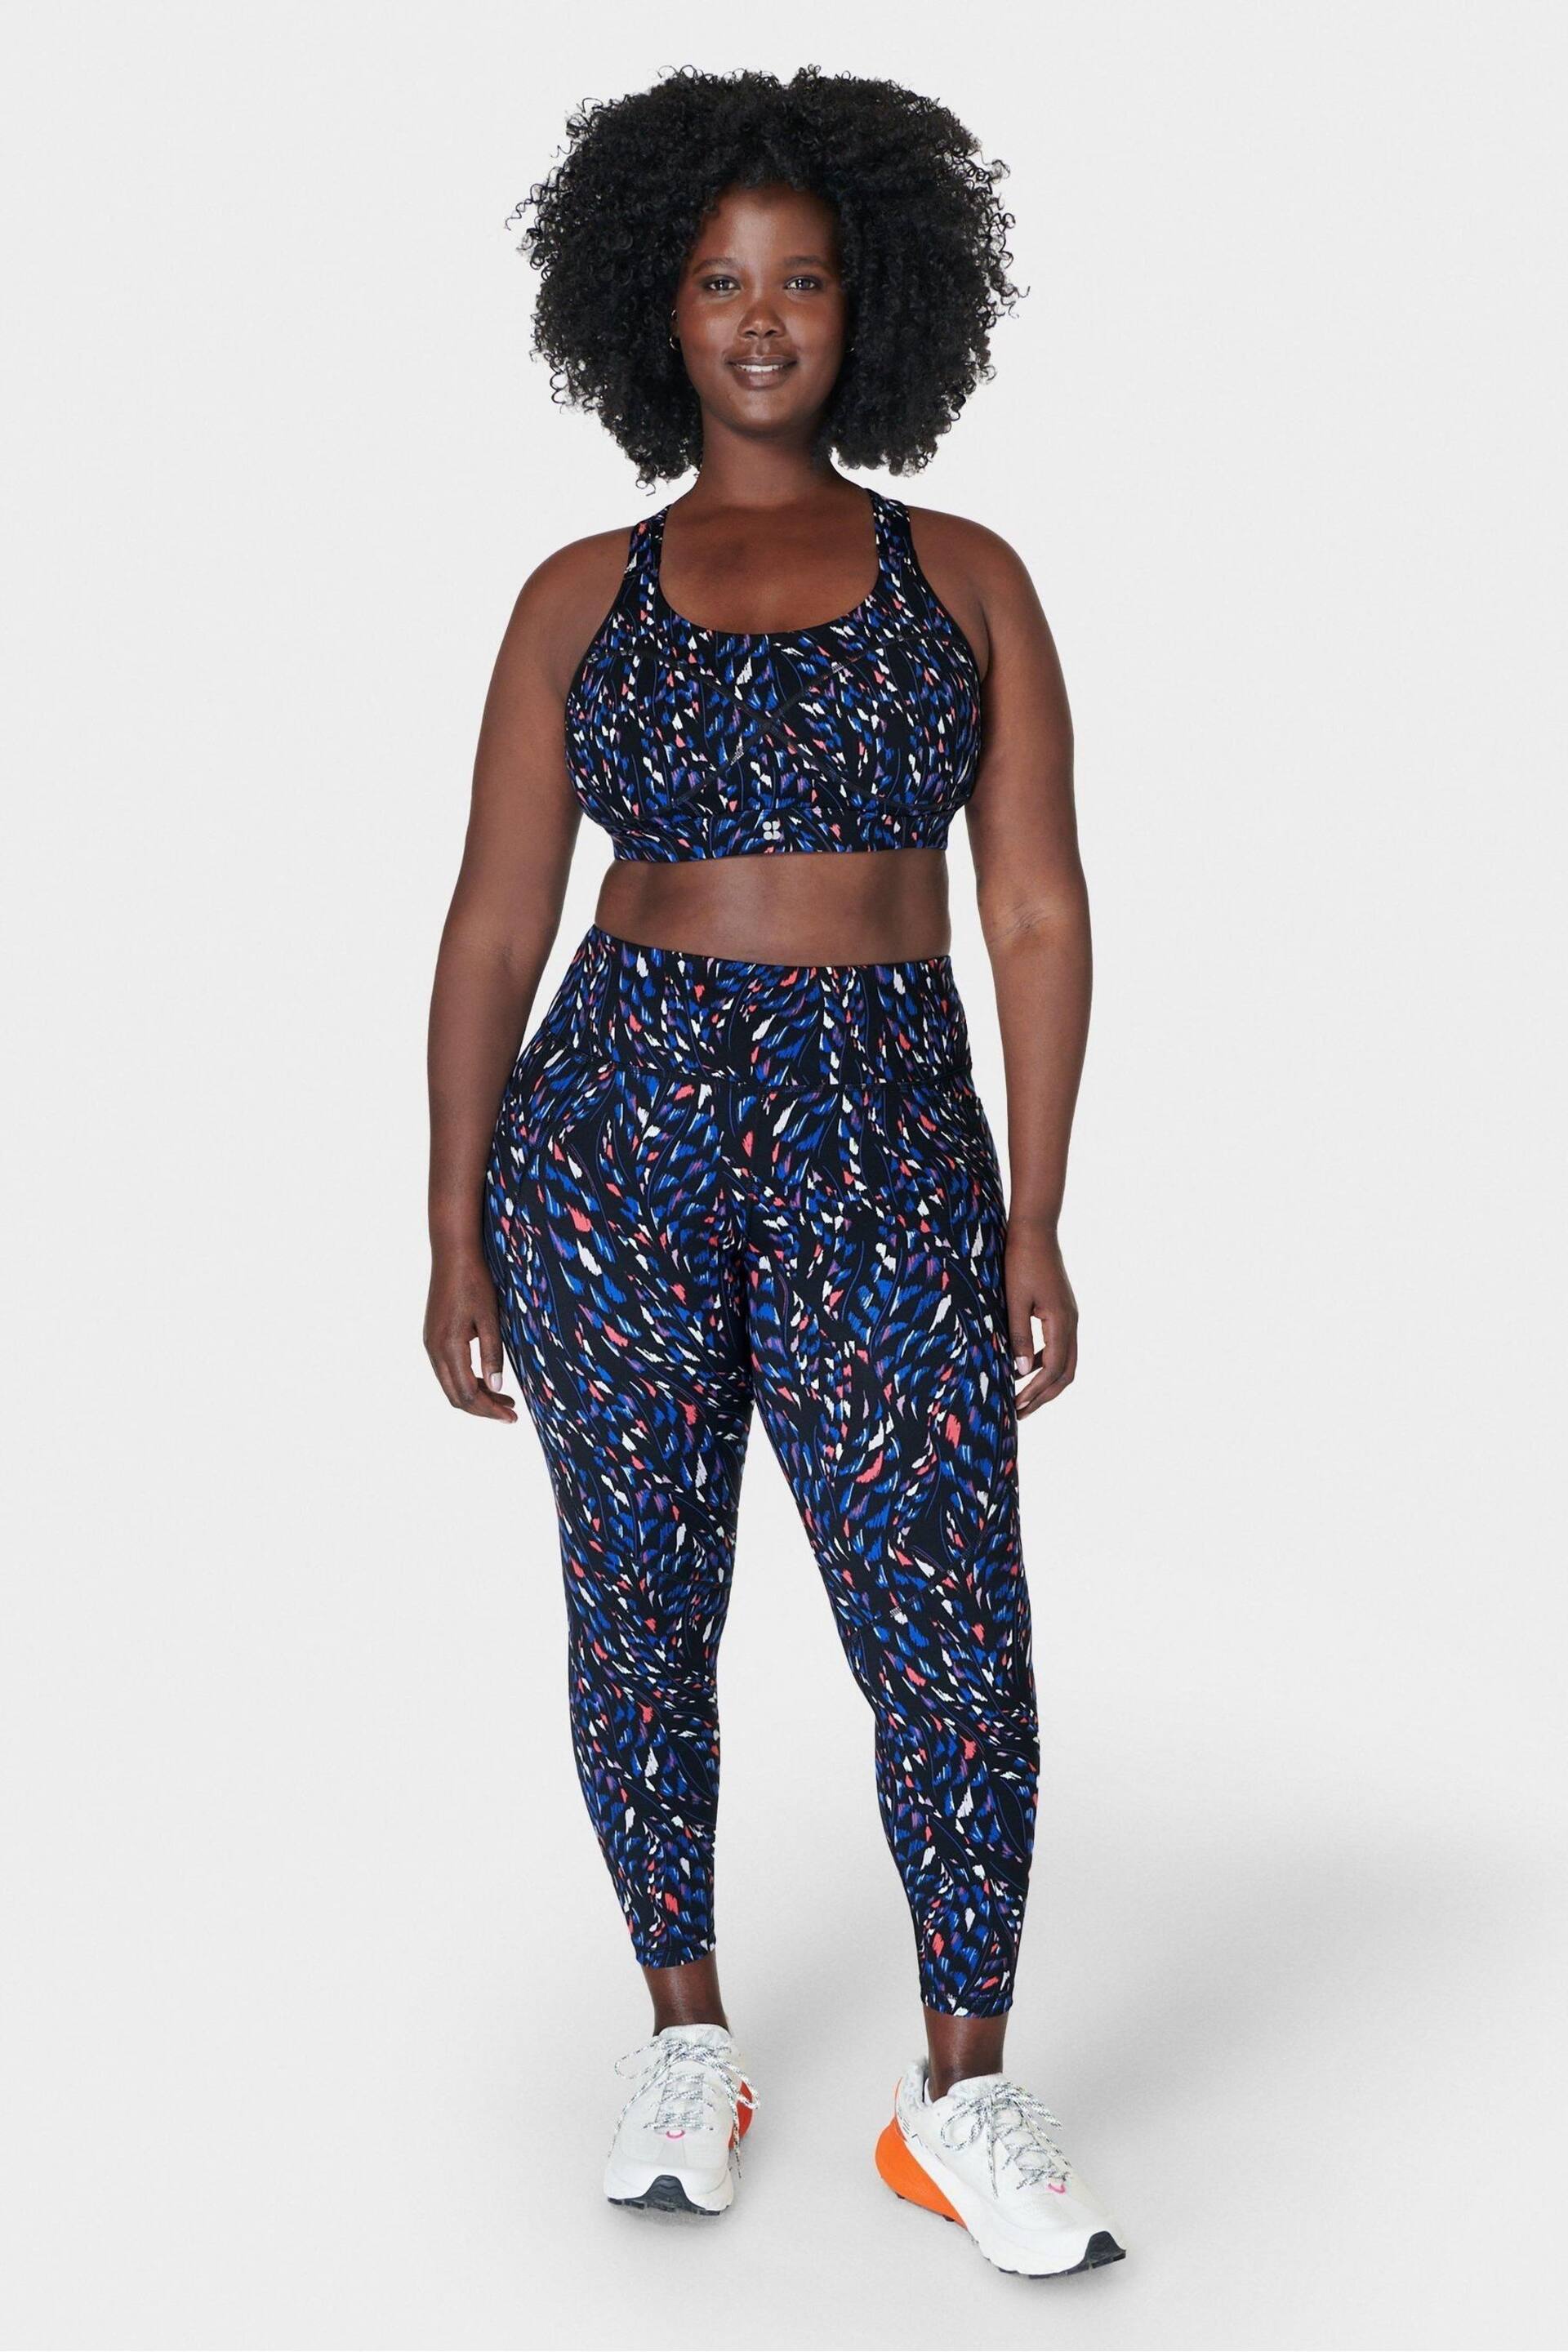 Sweaty Betty Black Coral Texture Print 7/8 Length Aerial Core Workout Leggings - Image 6 of 8